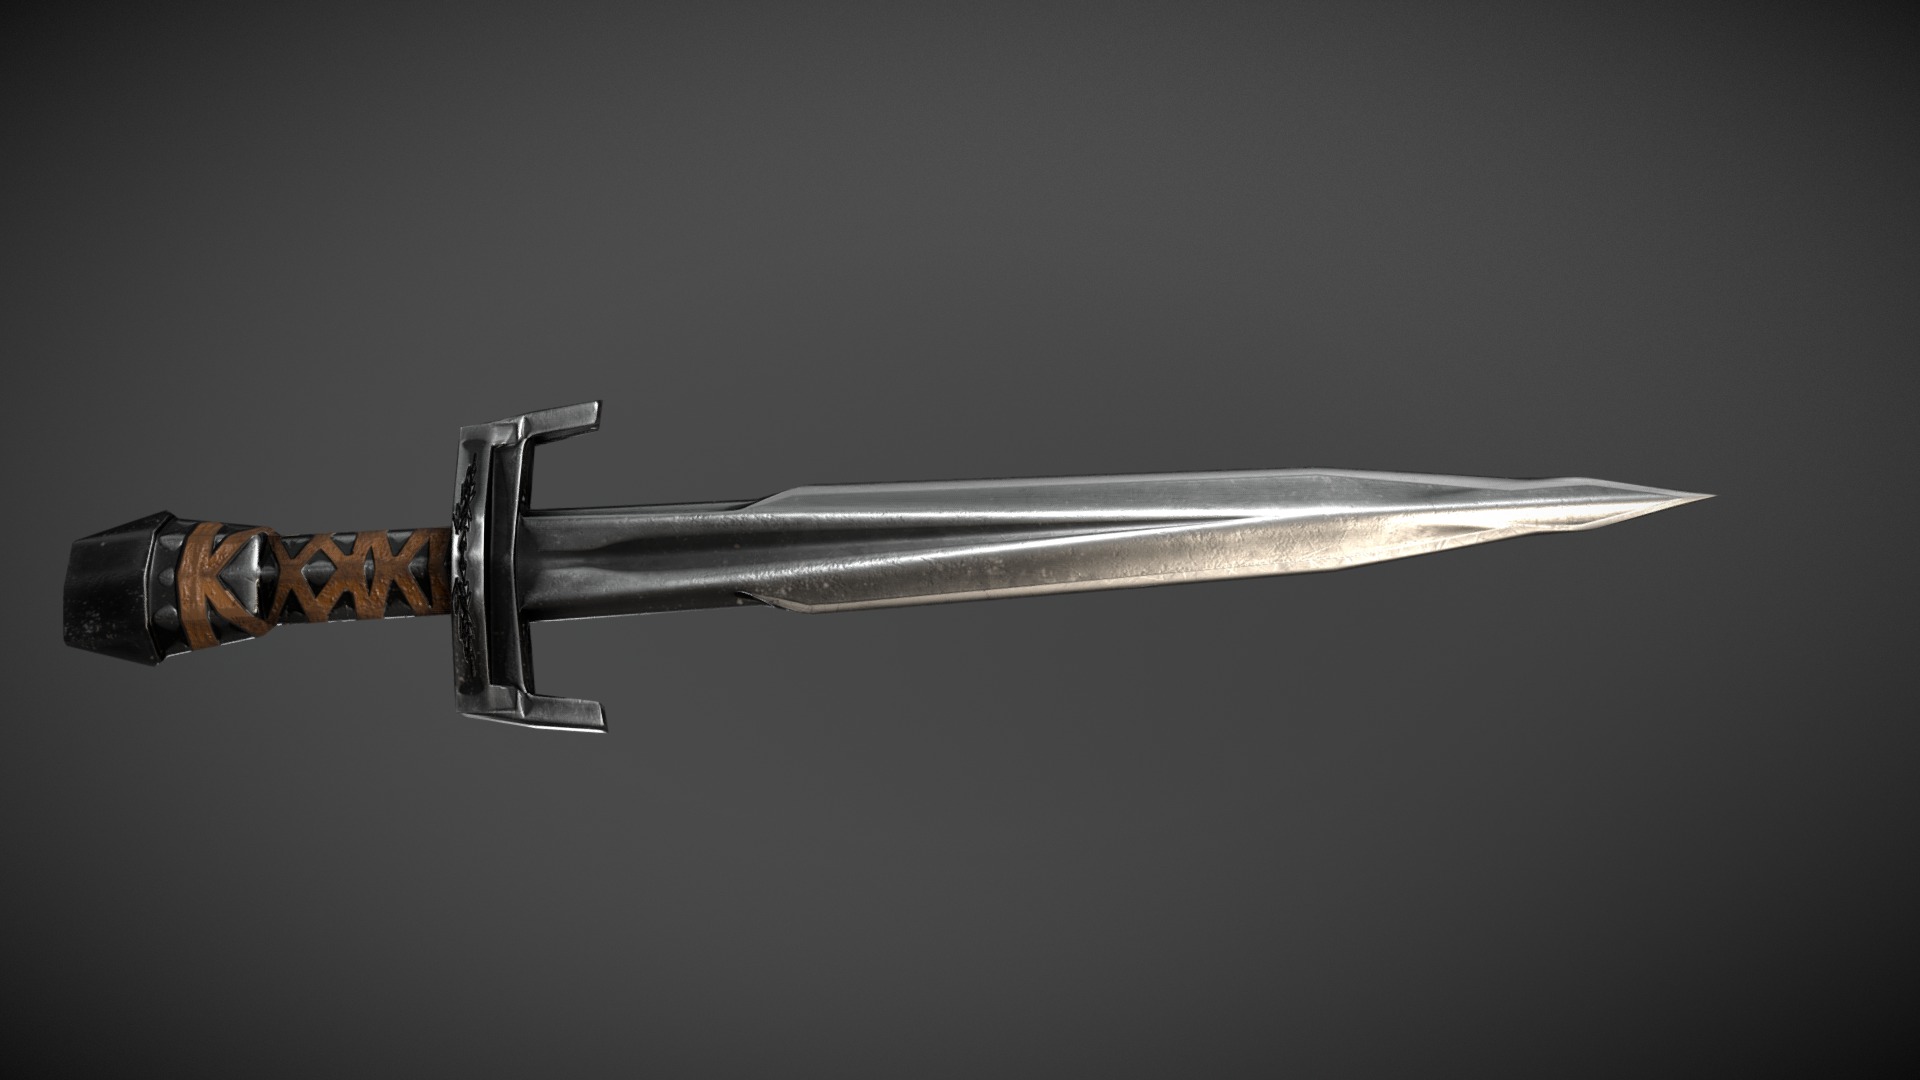 3D model Basic Sword - This is a 3D model of the Basic Sword. The 3D model is about a sword with a black handle.